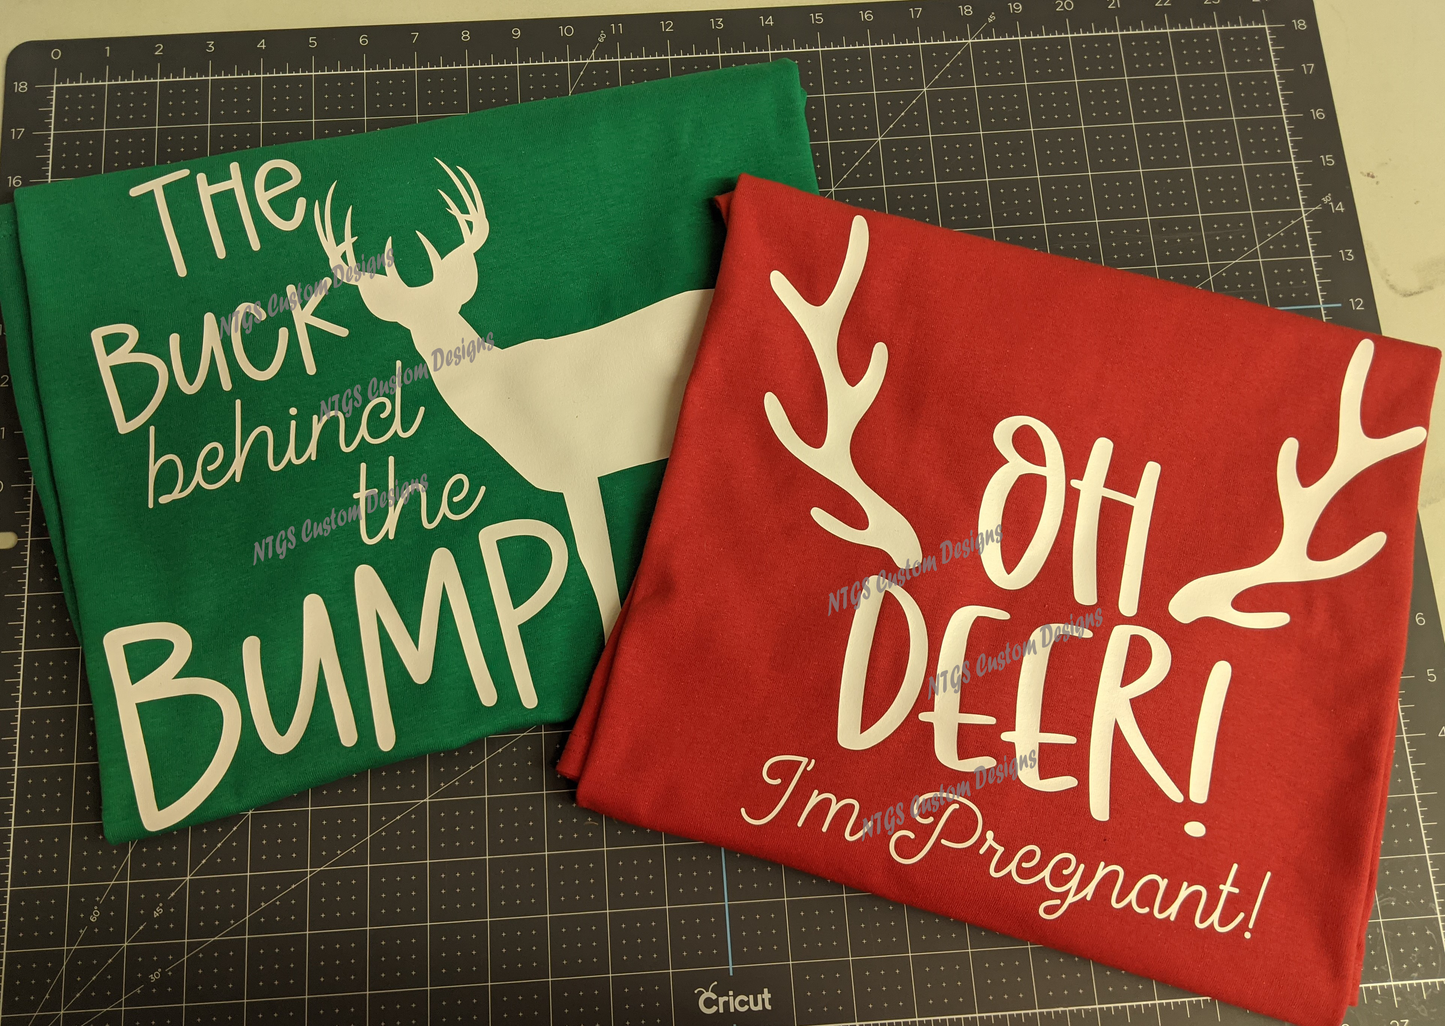 Oh Deer! I'm pregnant! -shirt one